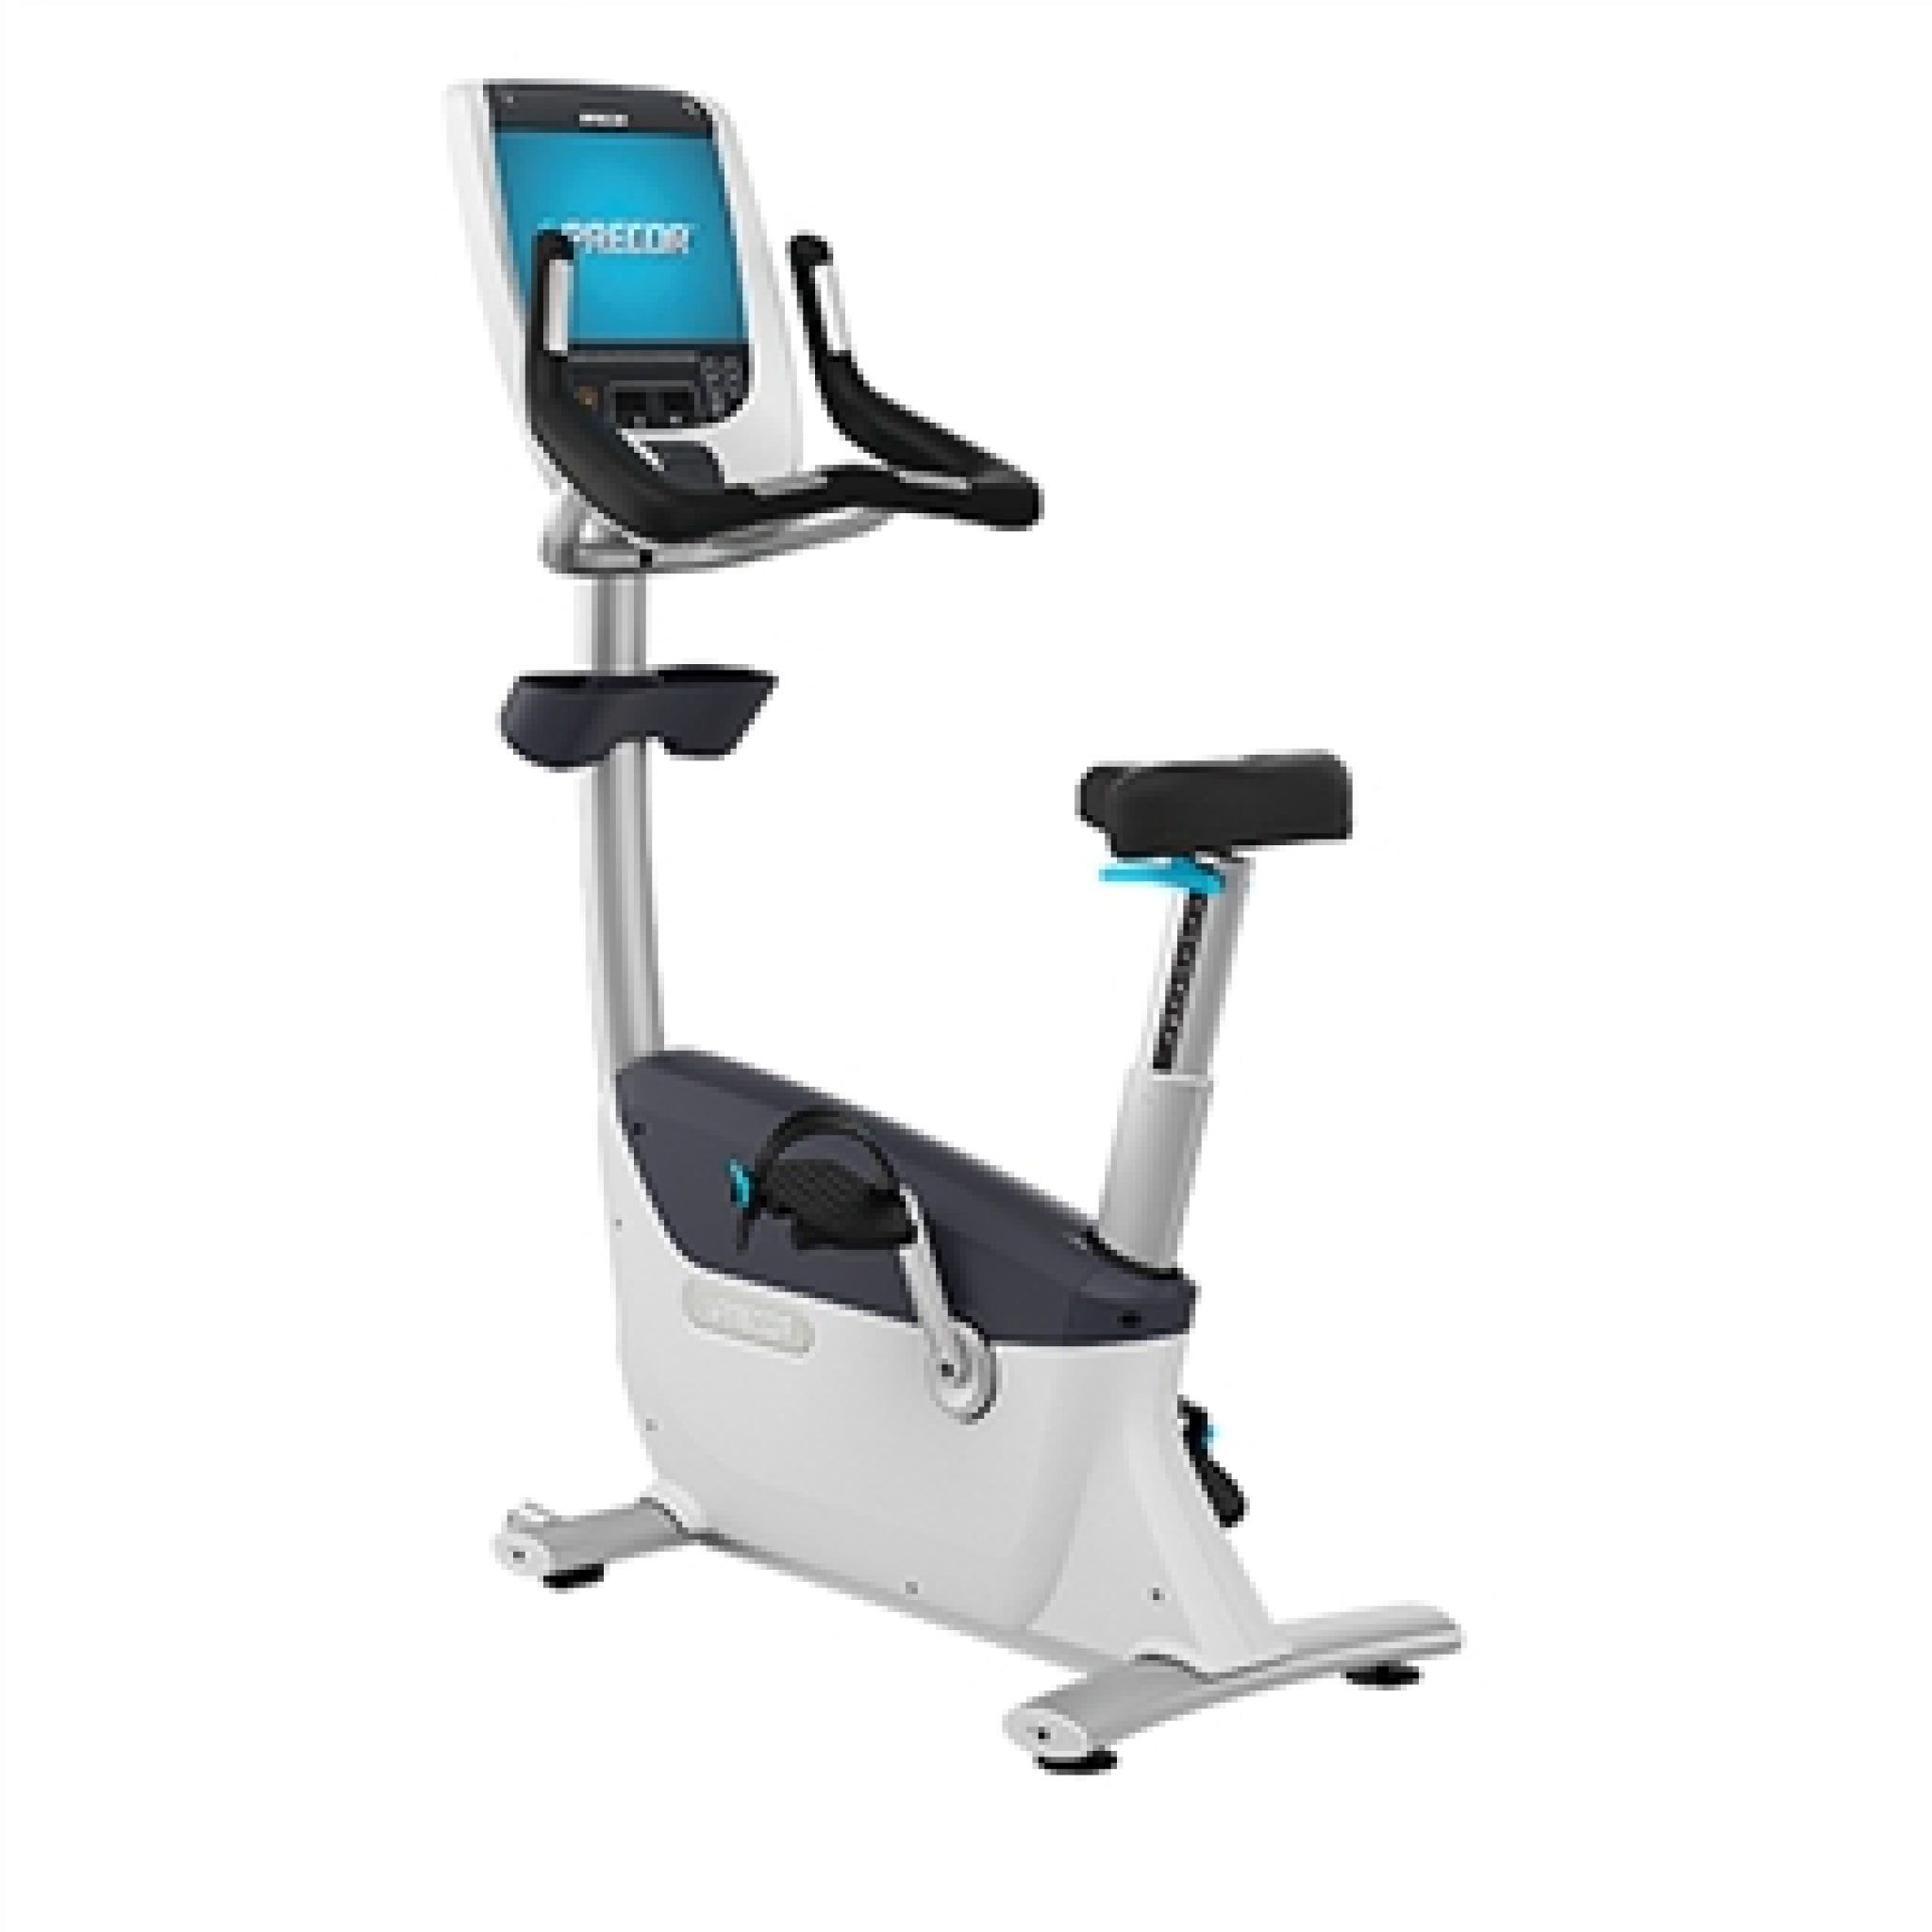 The left side view of the Precor UBK 885 Upright Bike With P80 Console